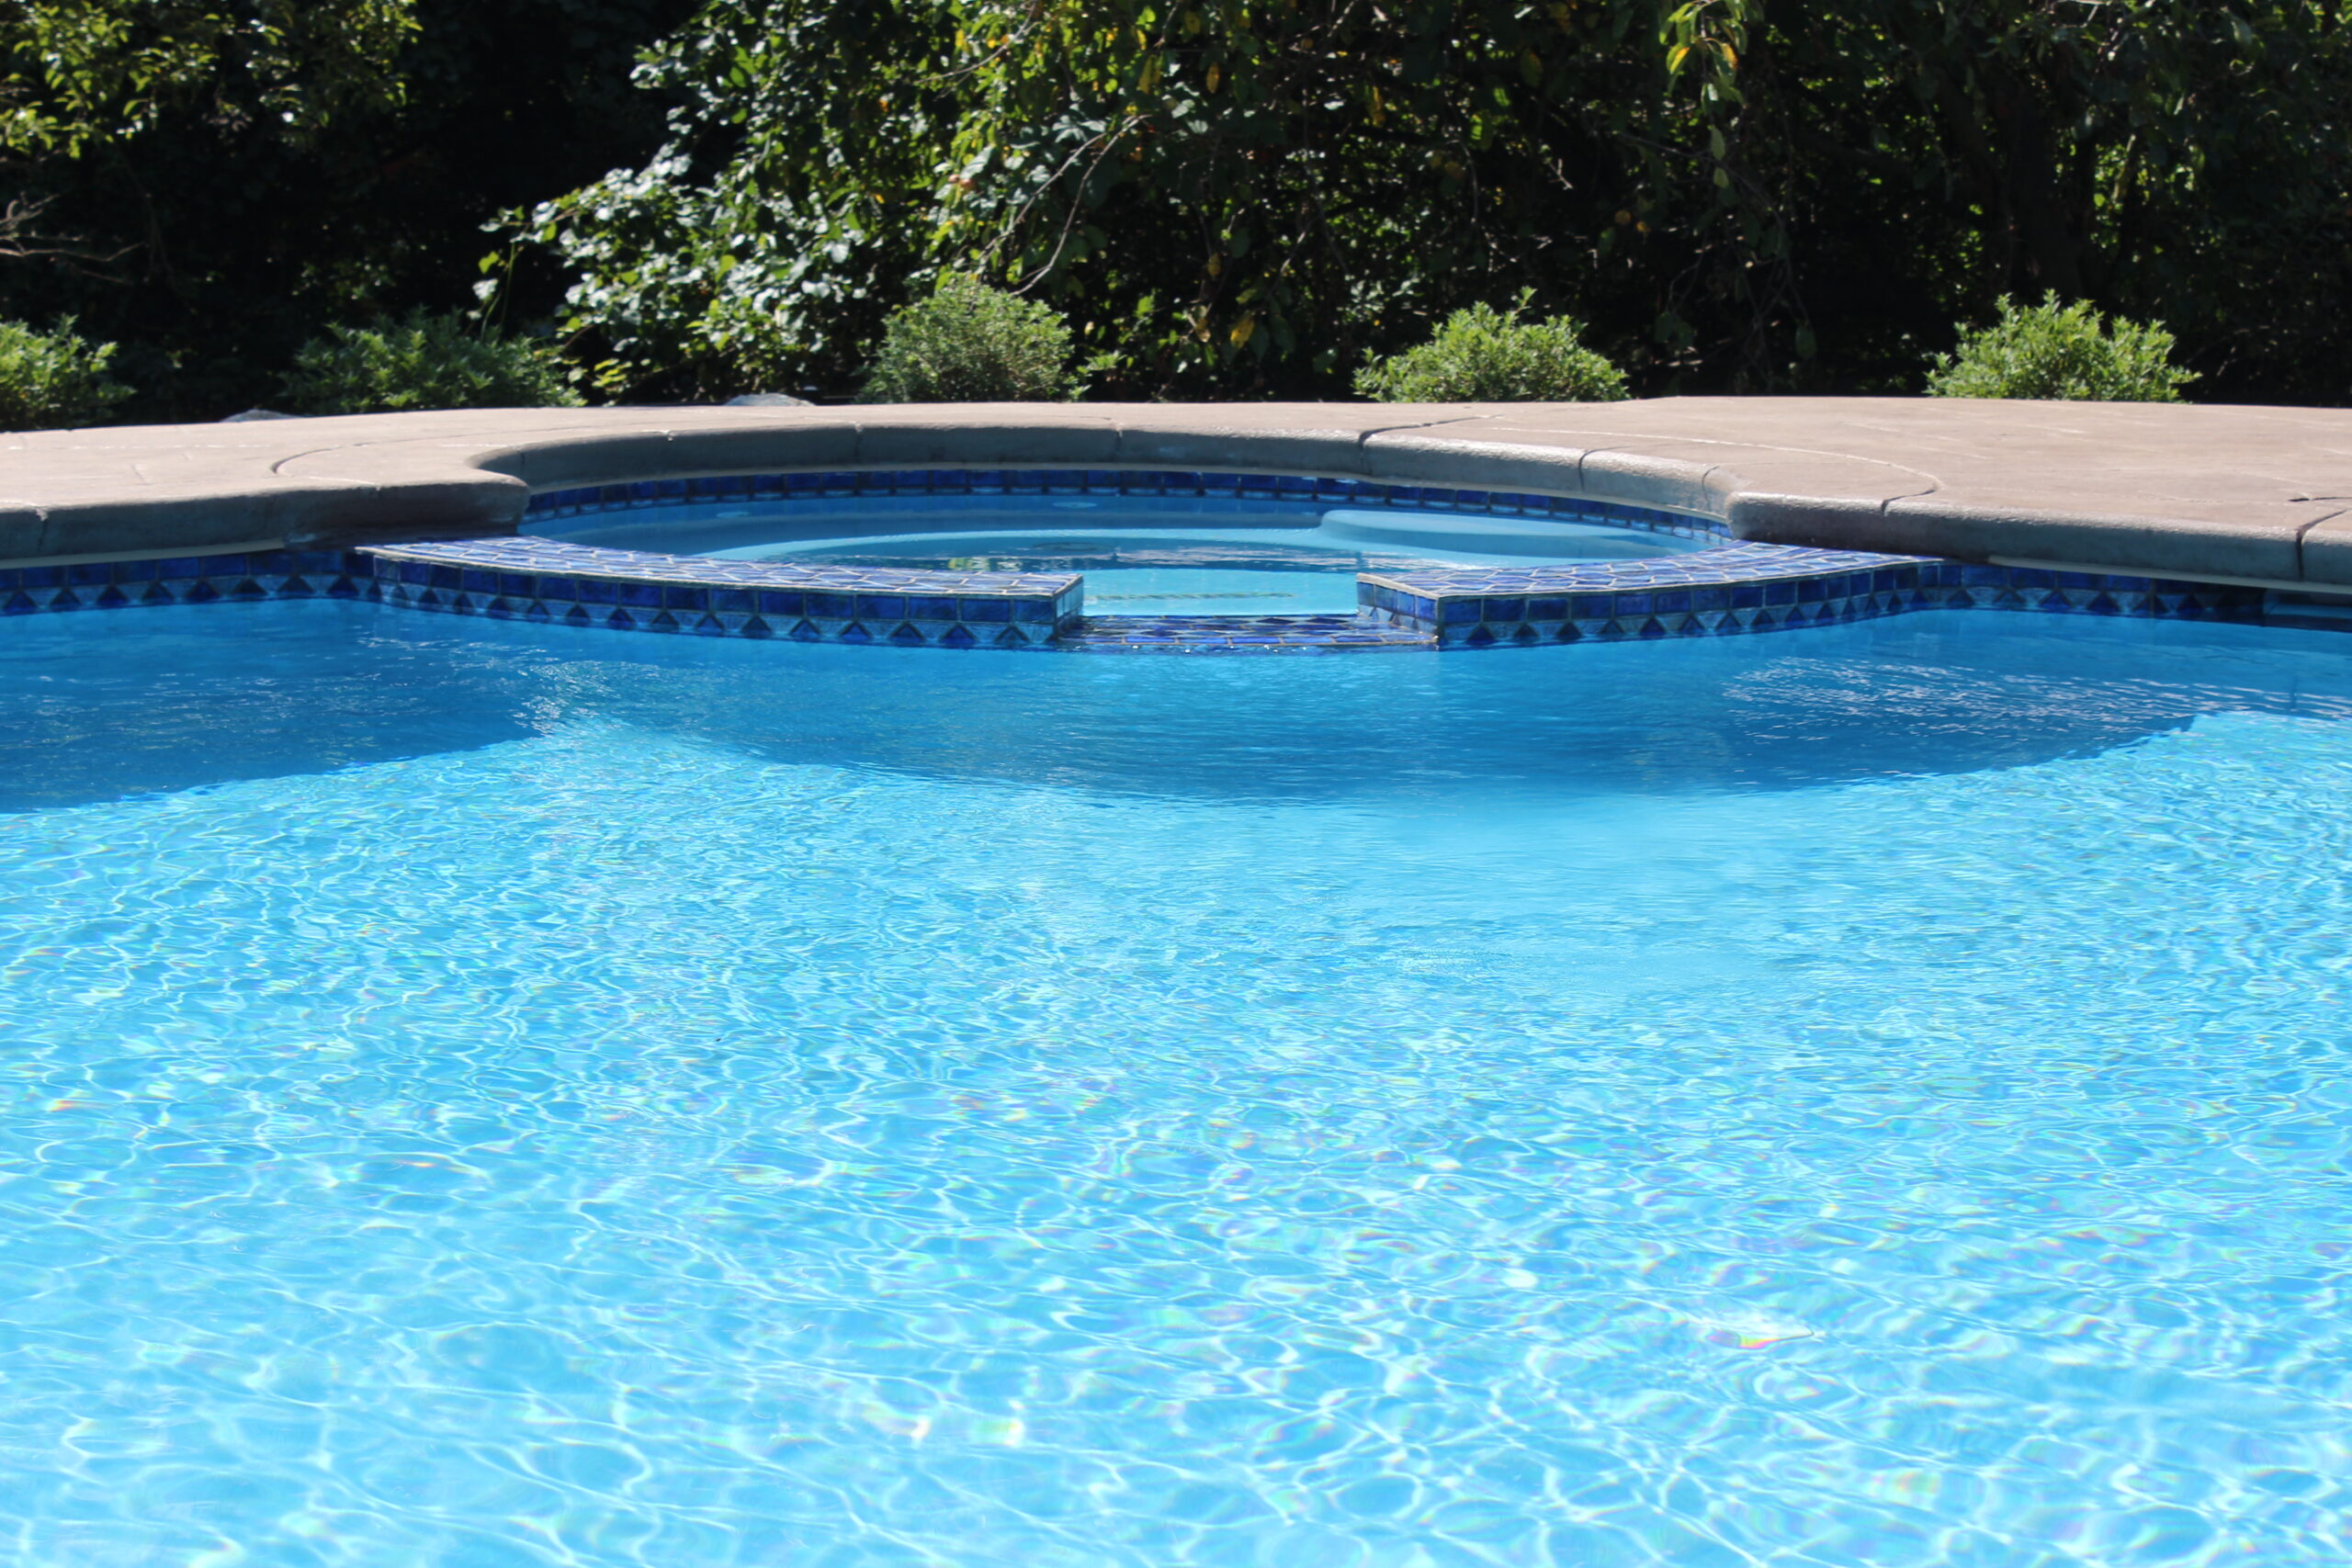 Top Pool Covers: Safety, Protection, & More